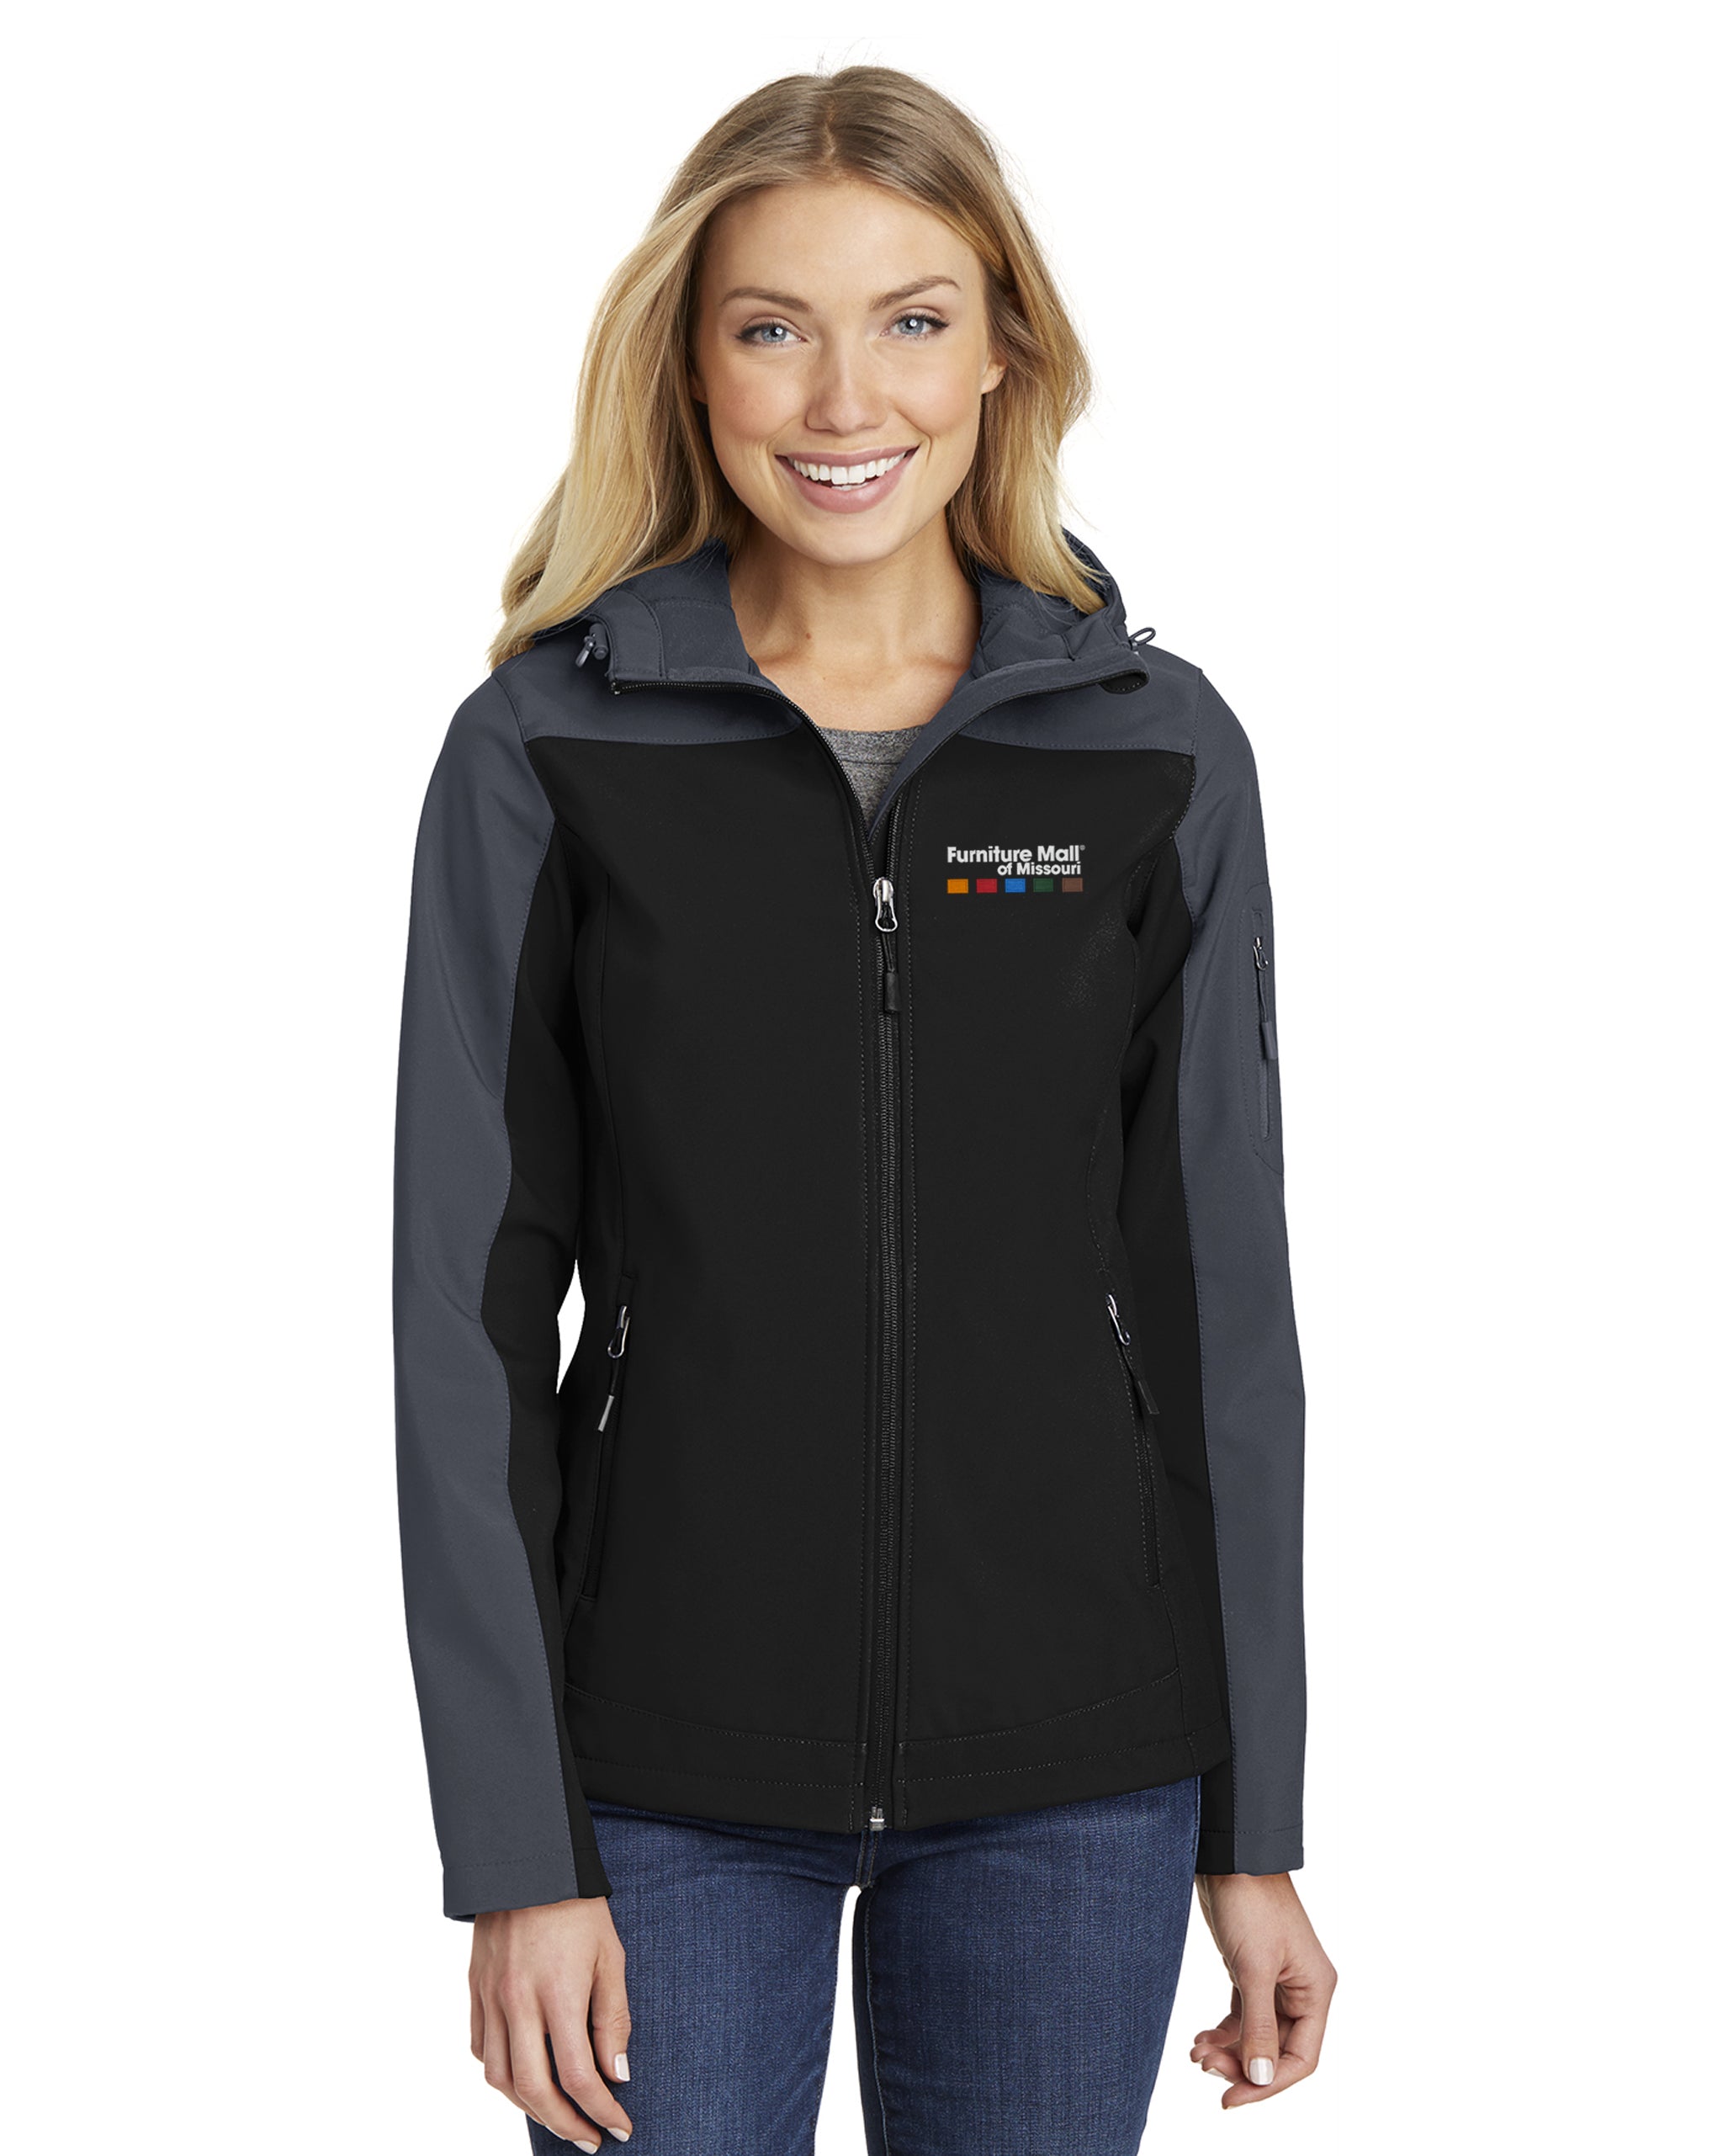 Furniture Mall of Missouri - Port Authority Ladies Hooded Core Soft Shell Jacket - L335